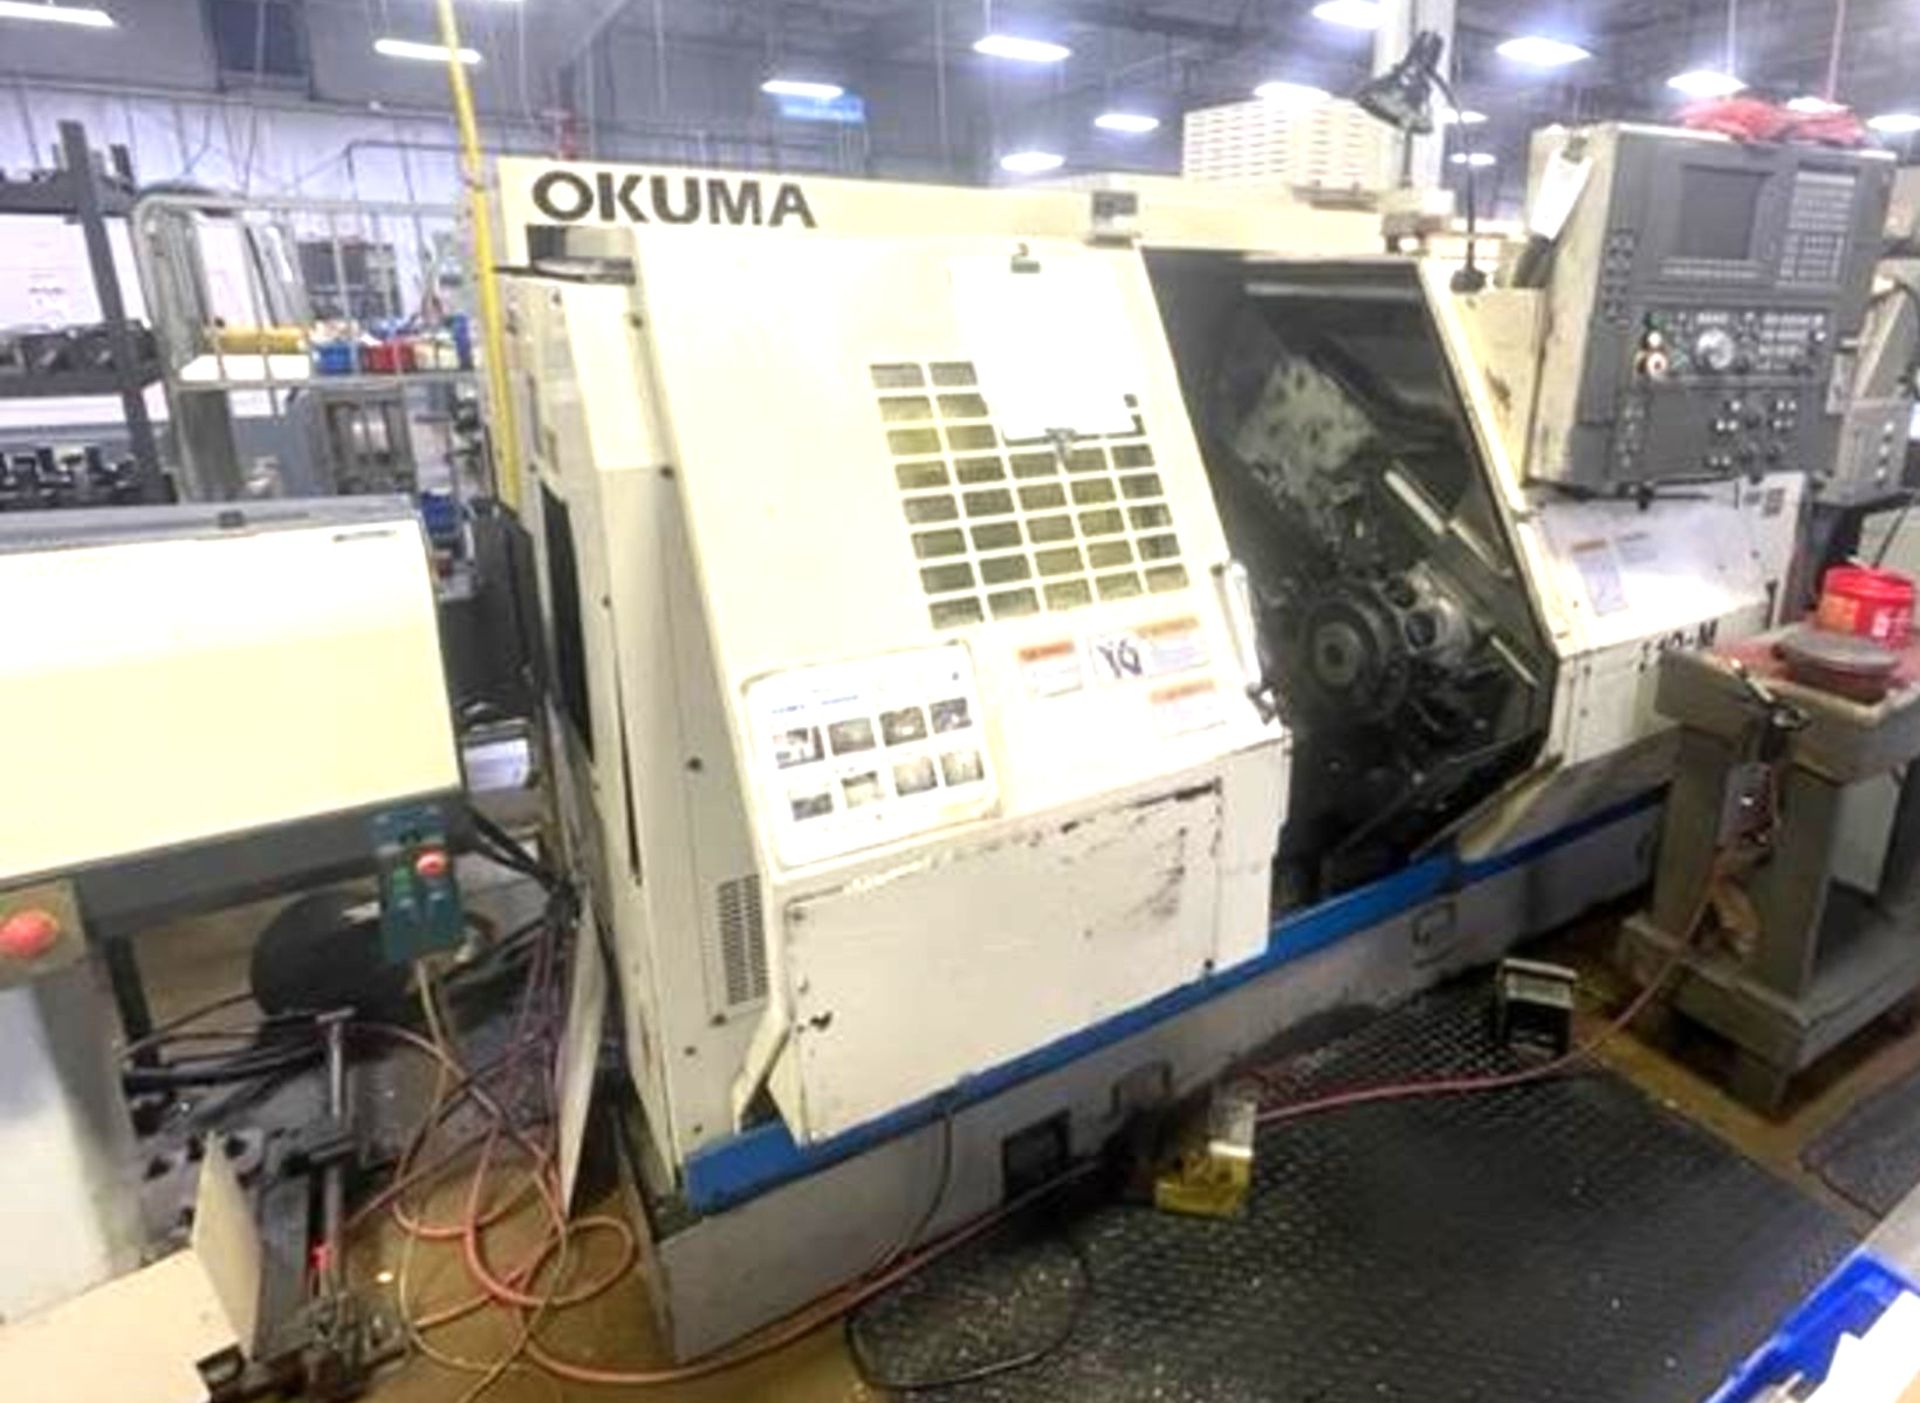 OKUMA LT-10MW 7-AXIS CNC TURNING CENTER LATHE, TWIN TURRET, SPINDLE & C-AXIS, LIVE TOOLING,